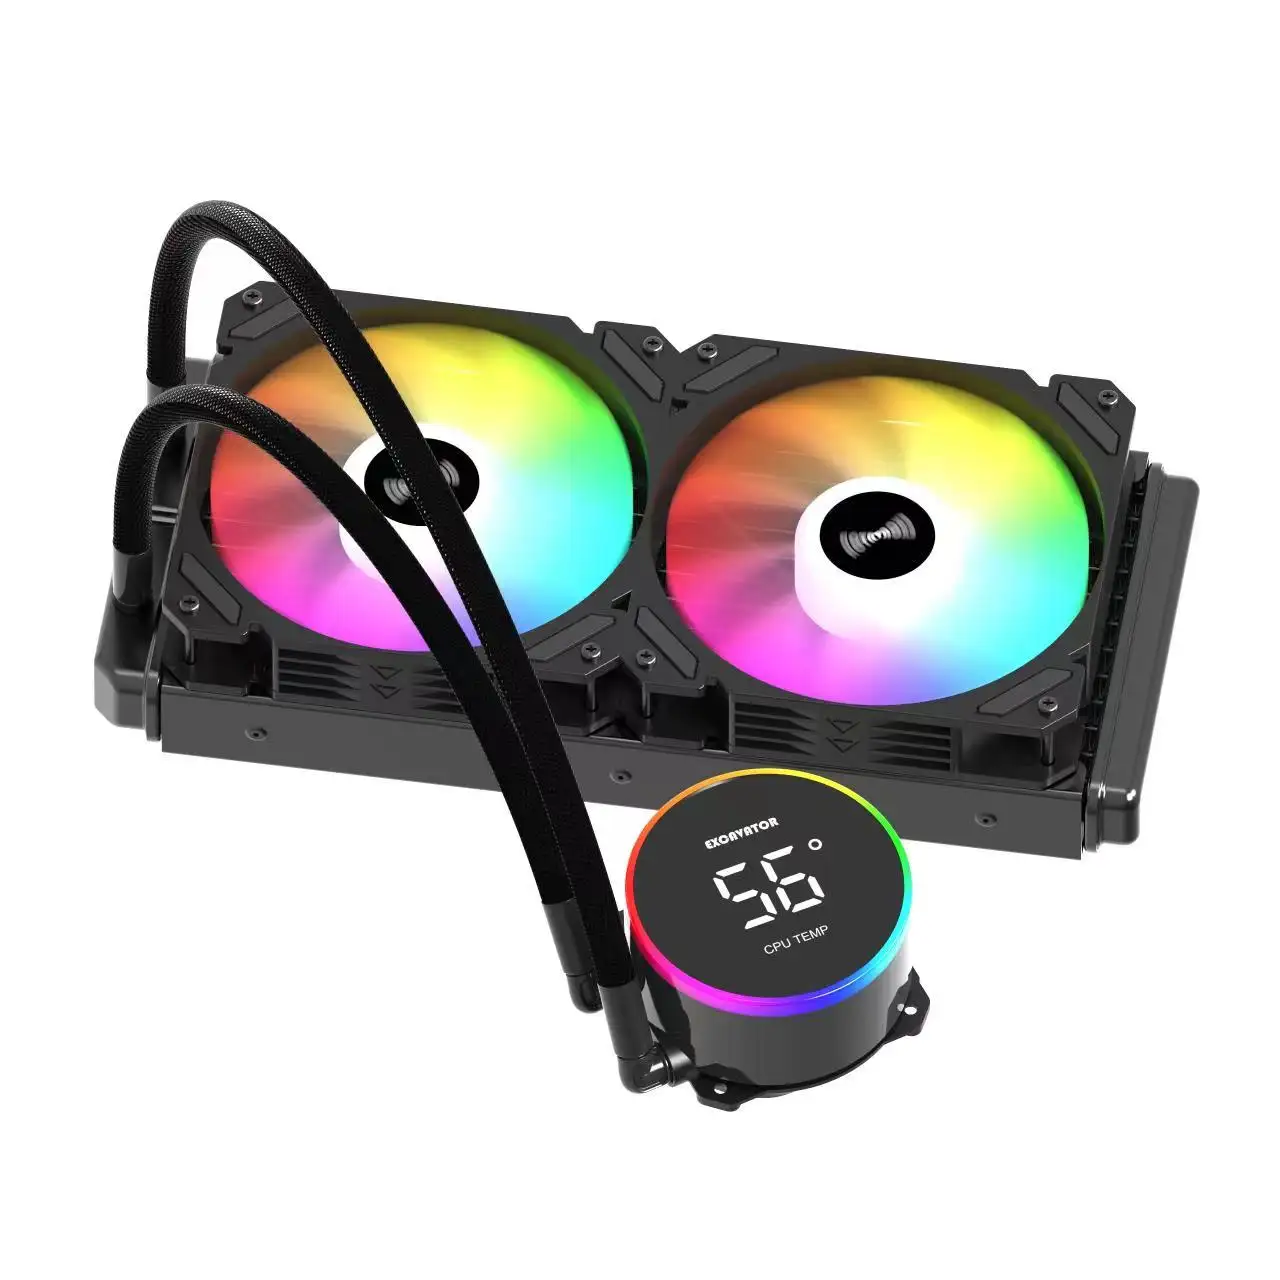 CPU LIQUID COOLERS 120mm 240mm 360mm ARGB Glare Fan Supports Intel and AMD CPU platform radiator Computer water cooling